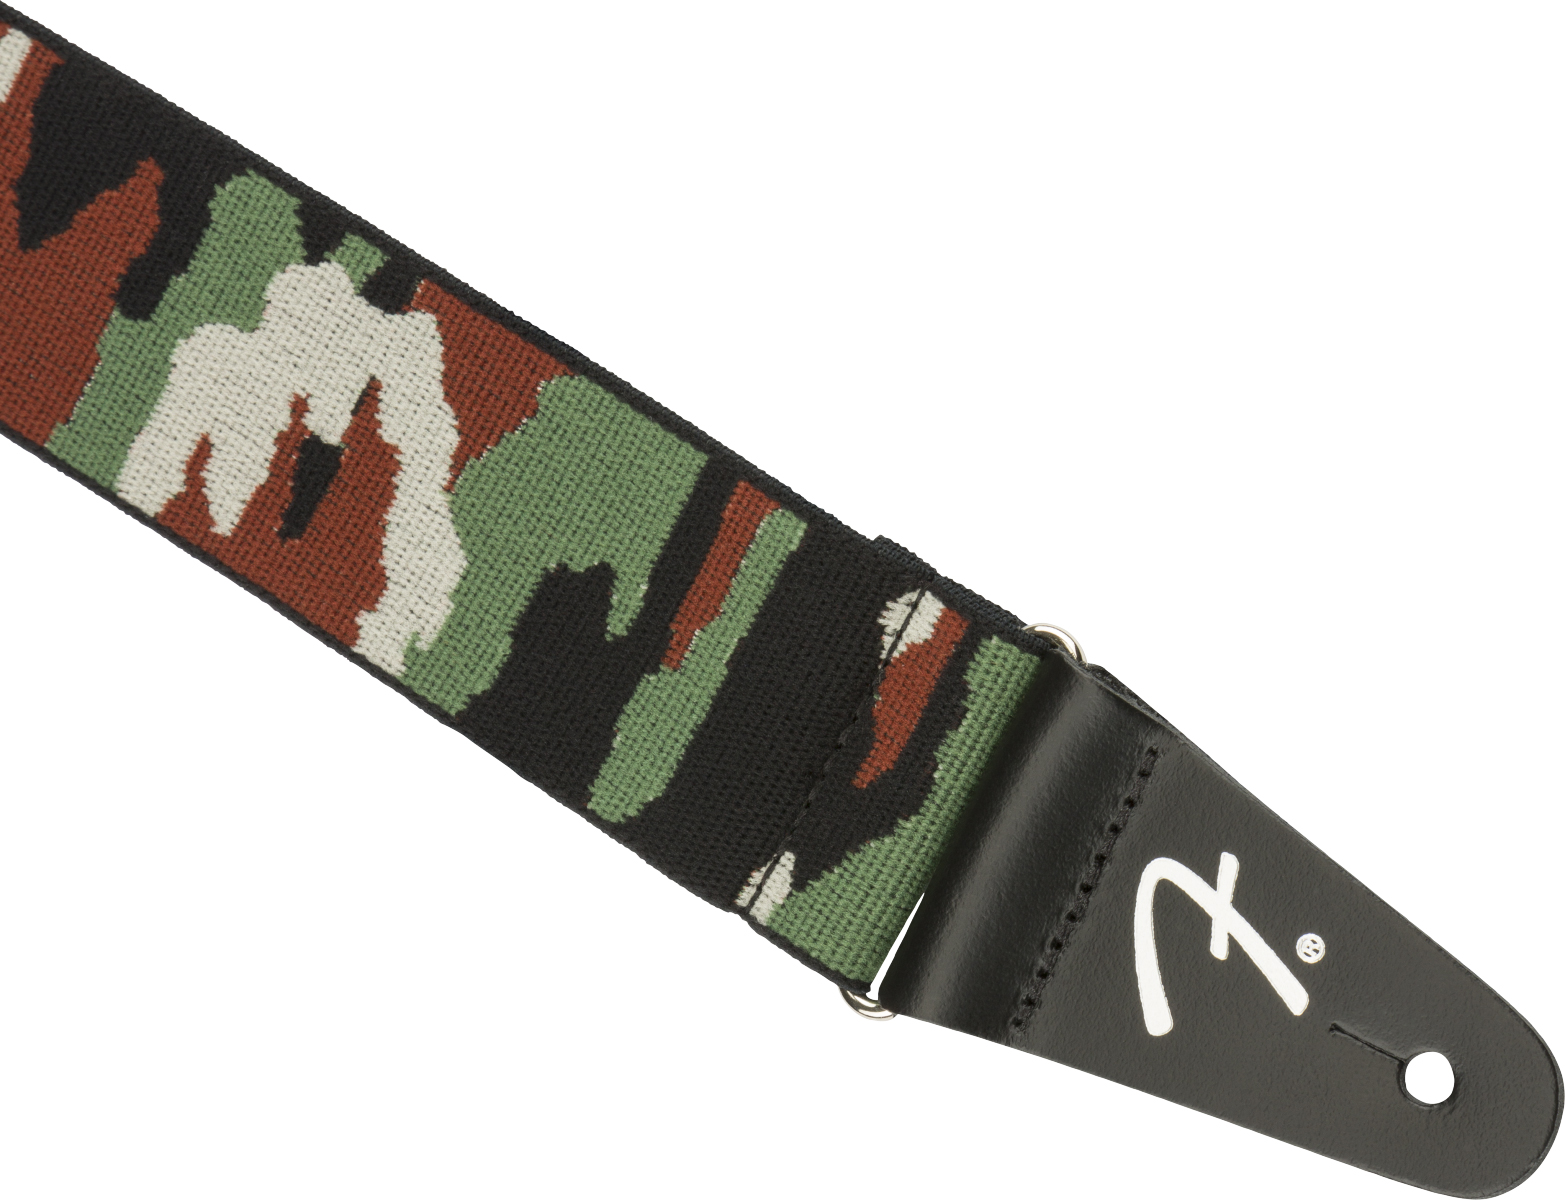 Fender Weighless 2 Inches Camo Guitar Strap Green - Guitar strap - Variation 1